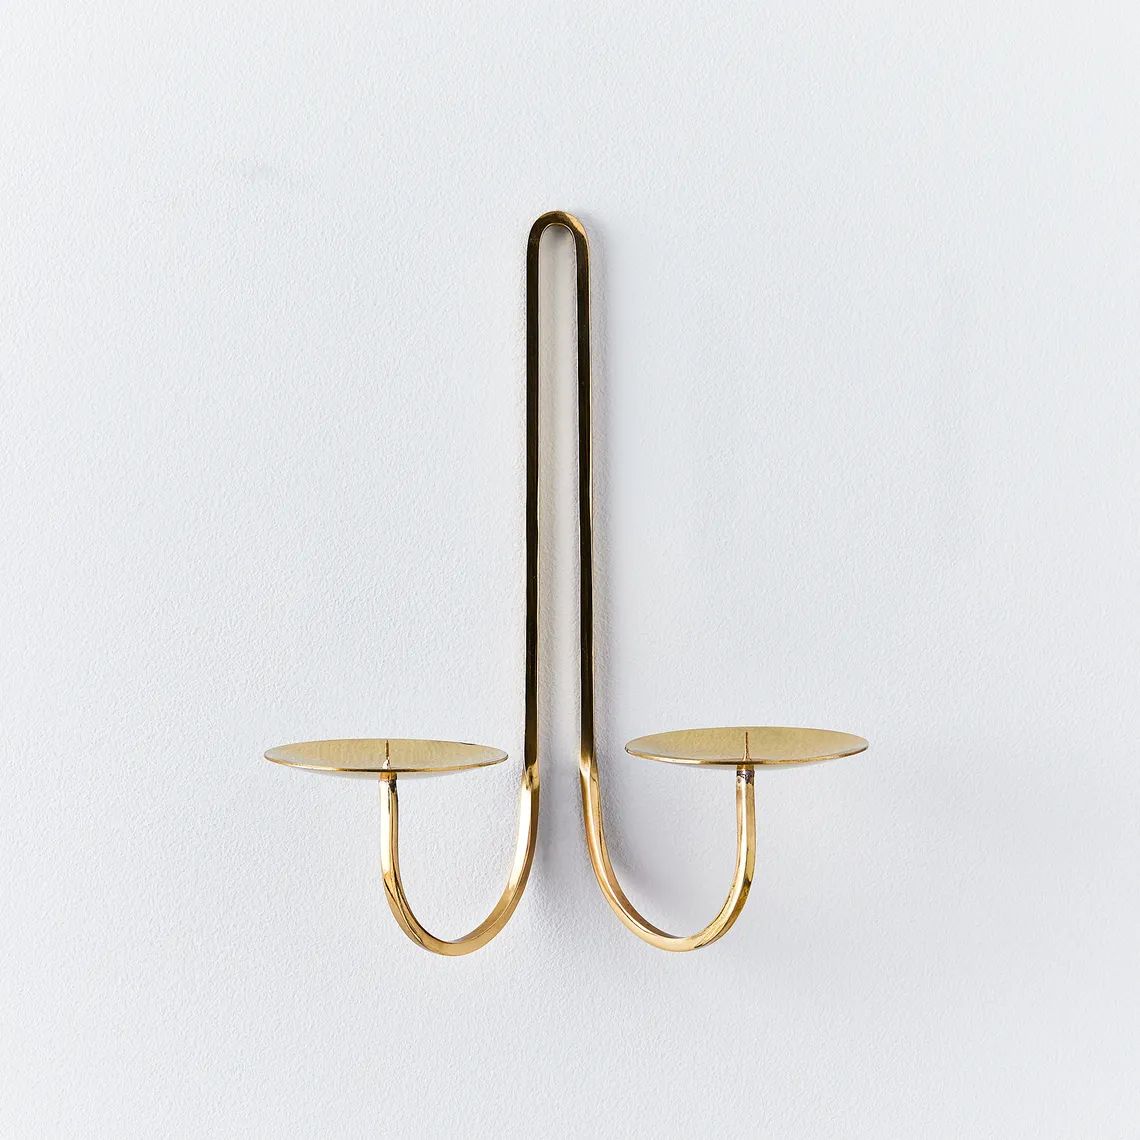 Fredericks & Mae Taper Candleholder Wall Sconce | Food52